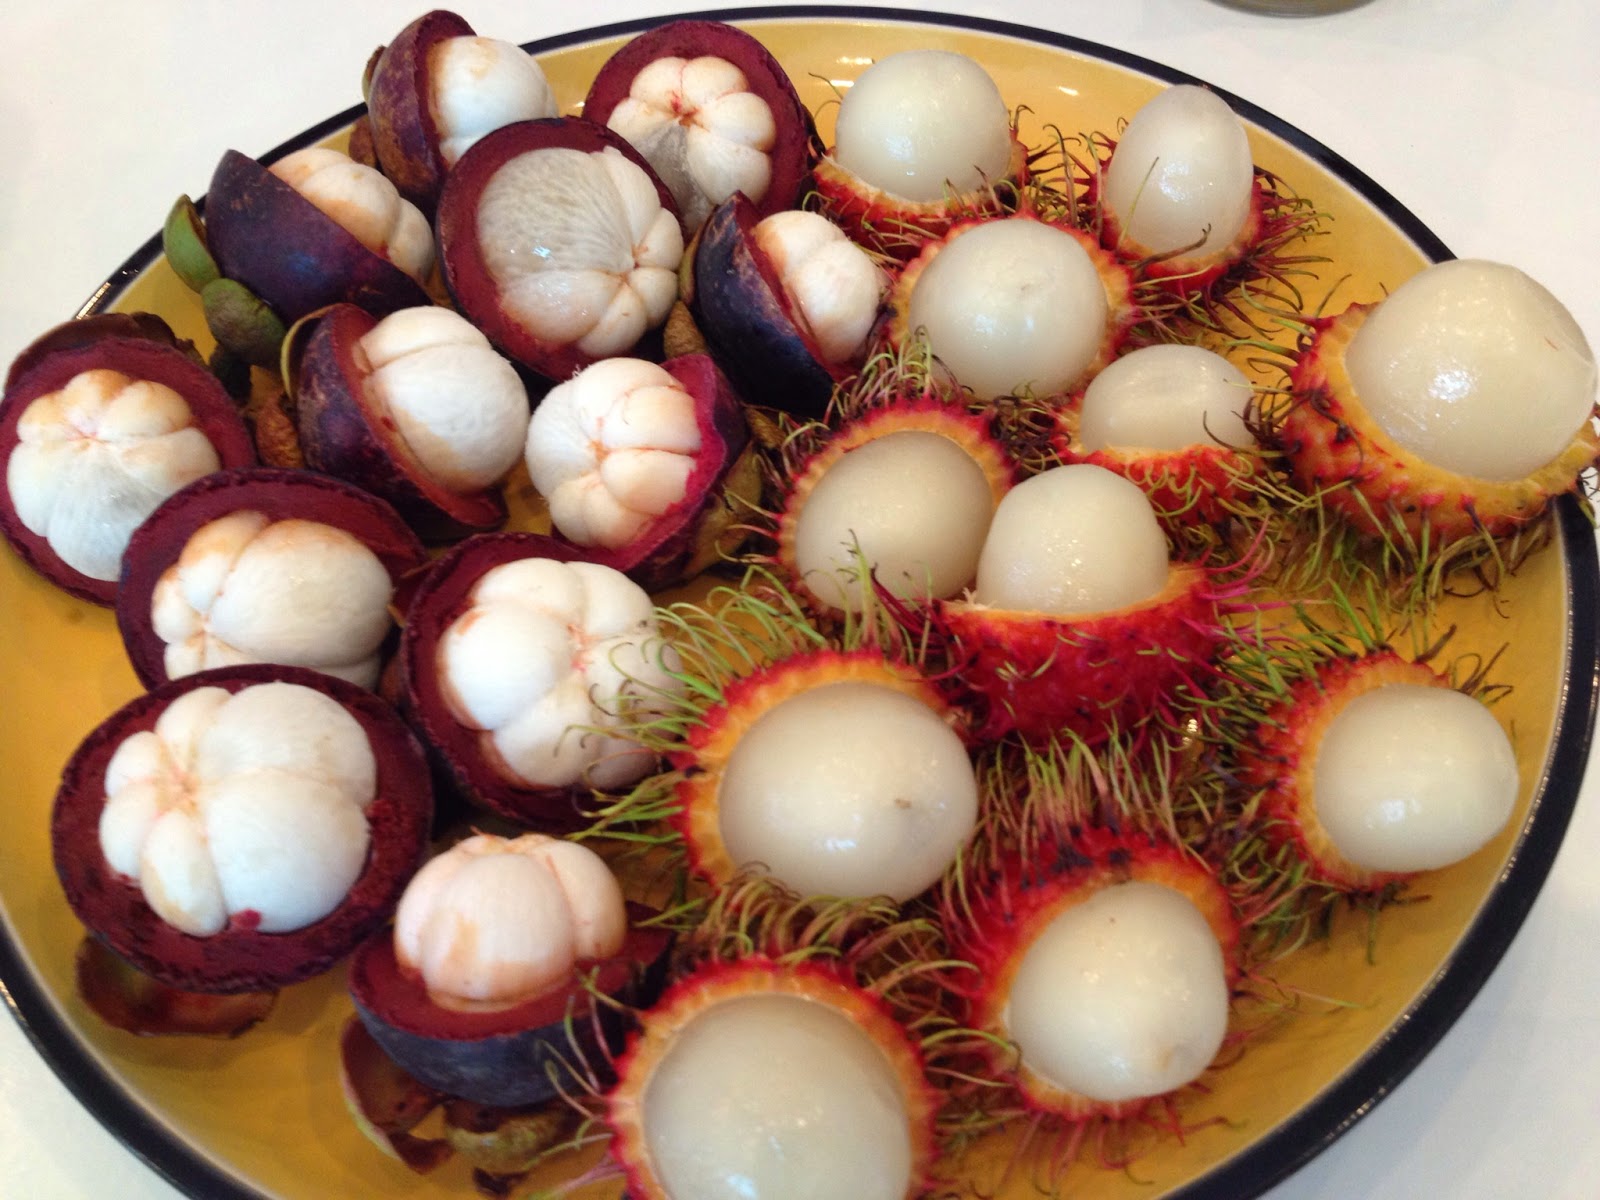 Bangkok - This is what mangosteen and rambutan look like when they're peeled